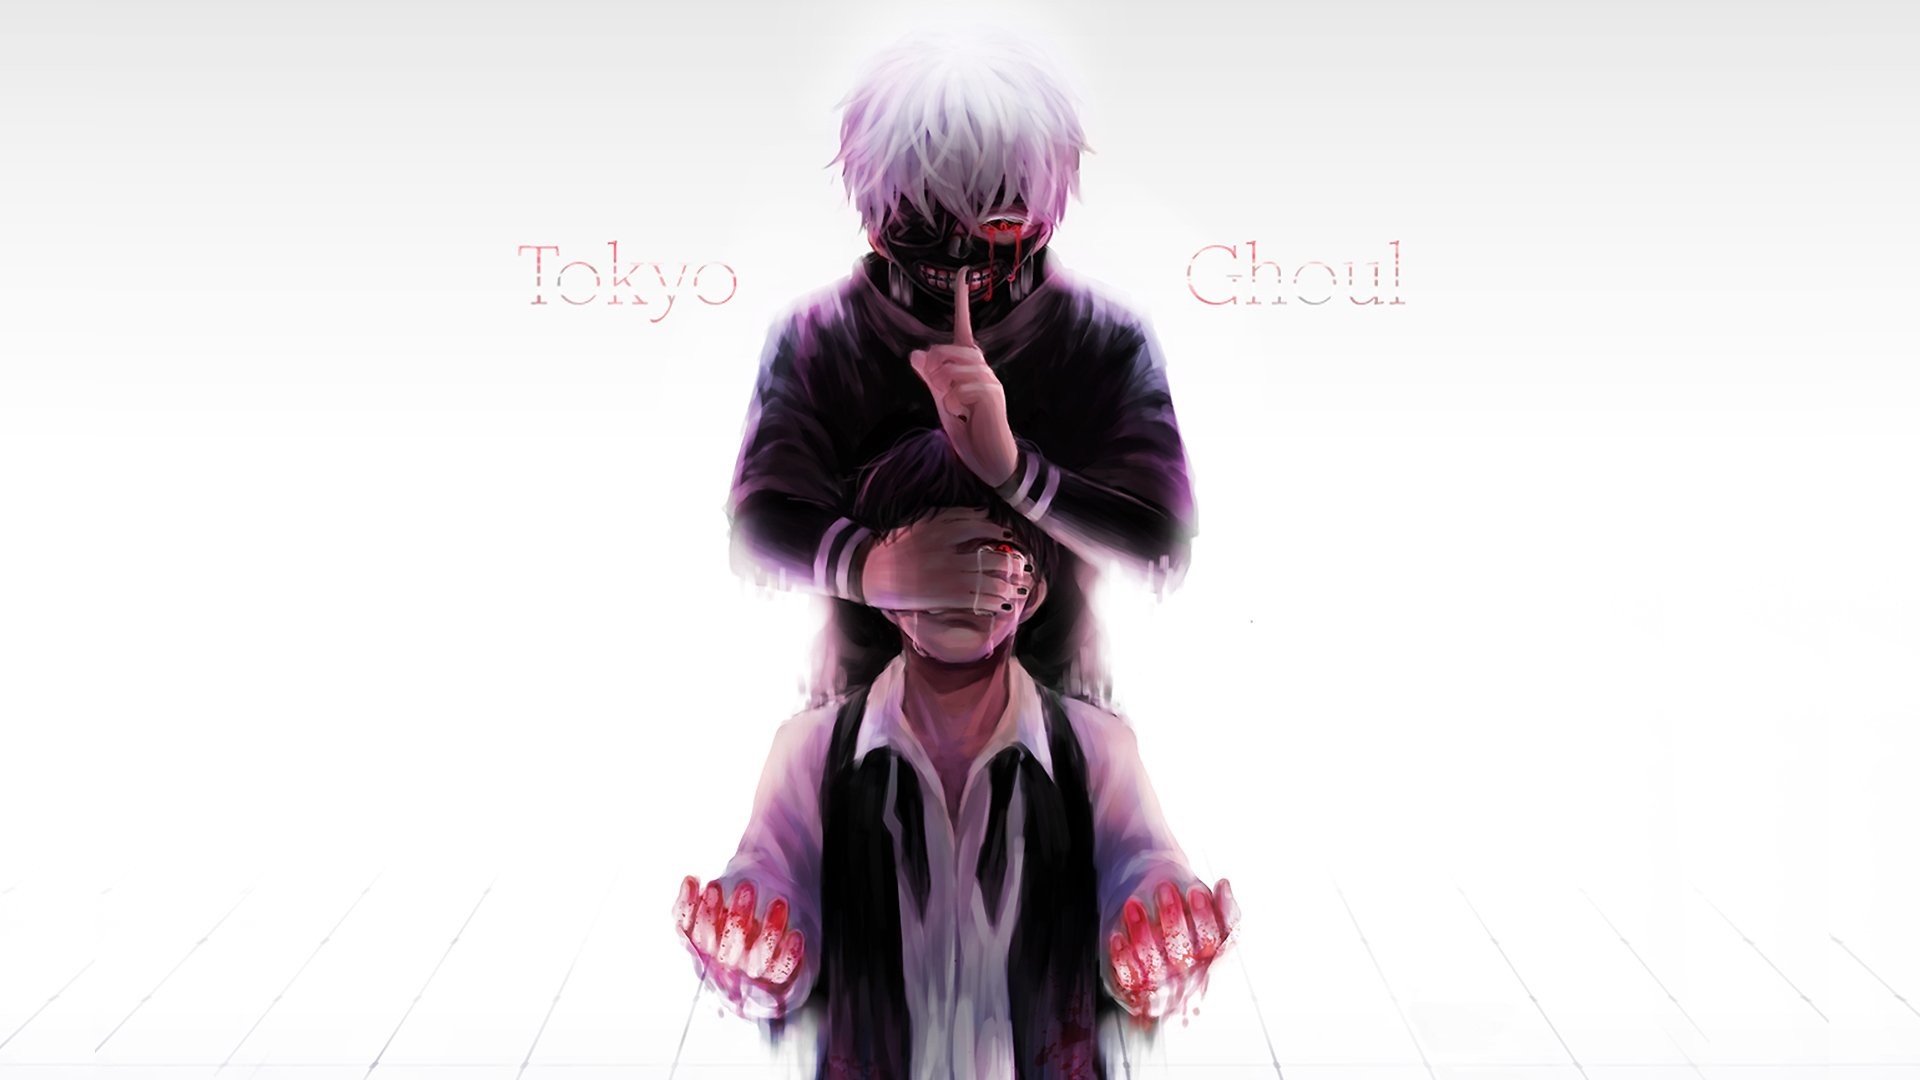 HD Wallpaper Background ID596856. Anime Tokyo Ghoul